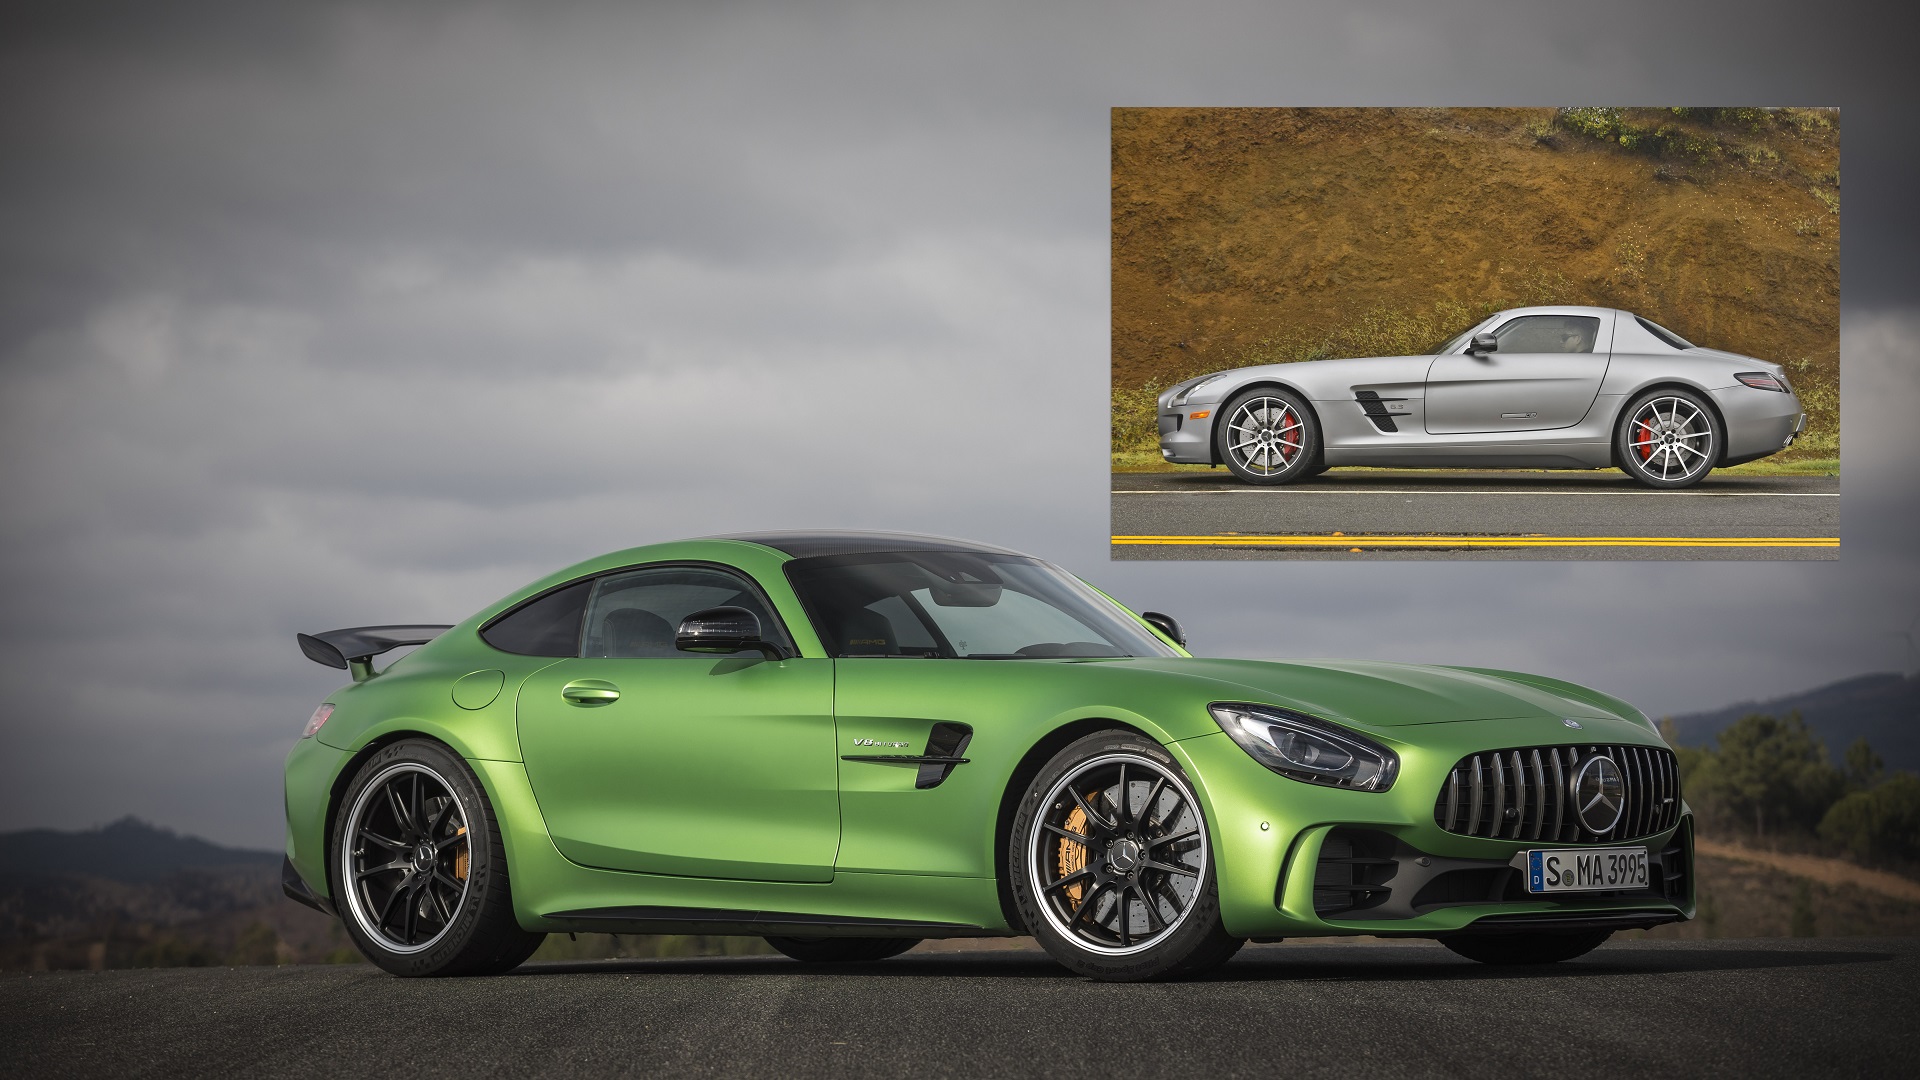 Whats the difference between Mercedes-Benz vs. Mercedes-AMG?